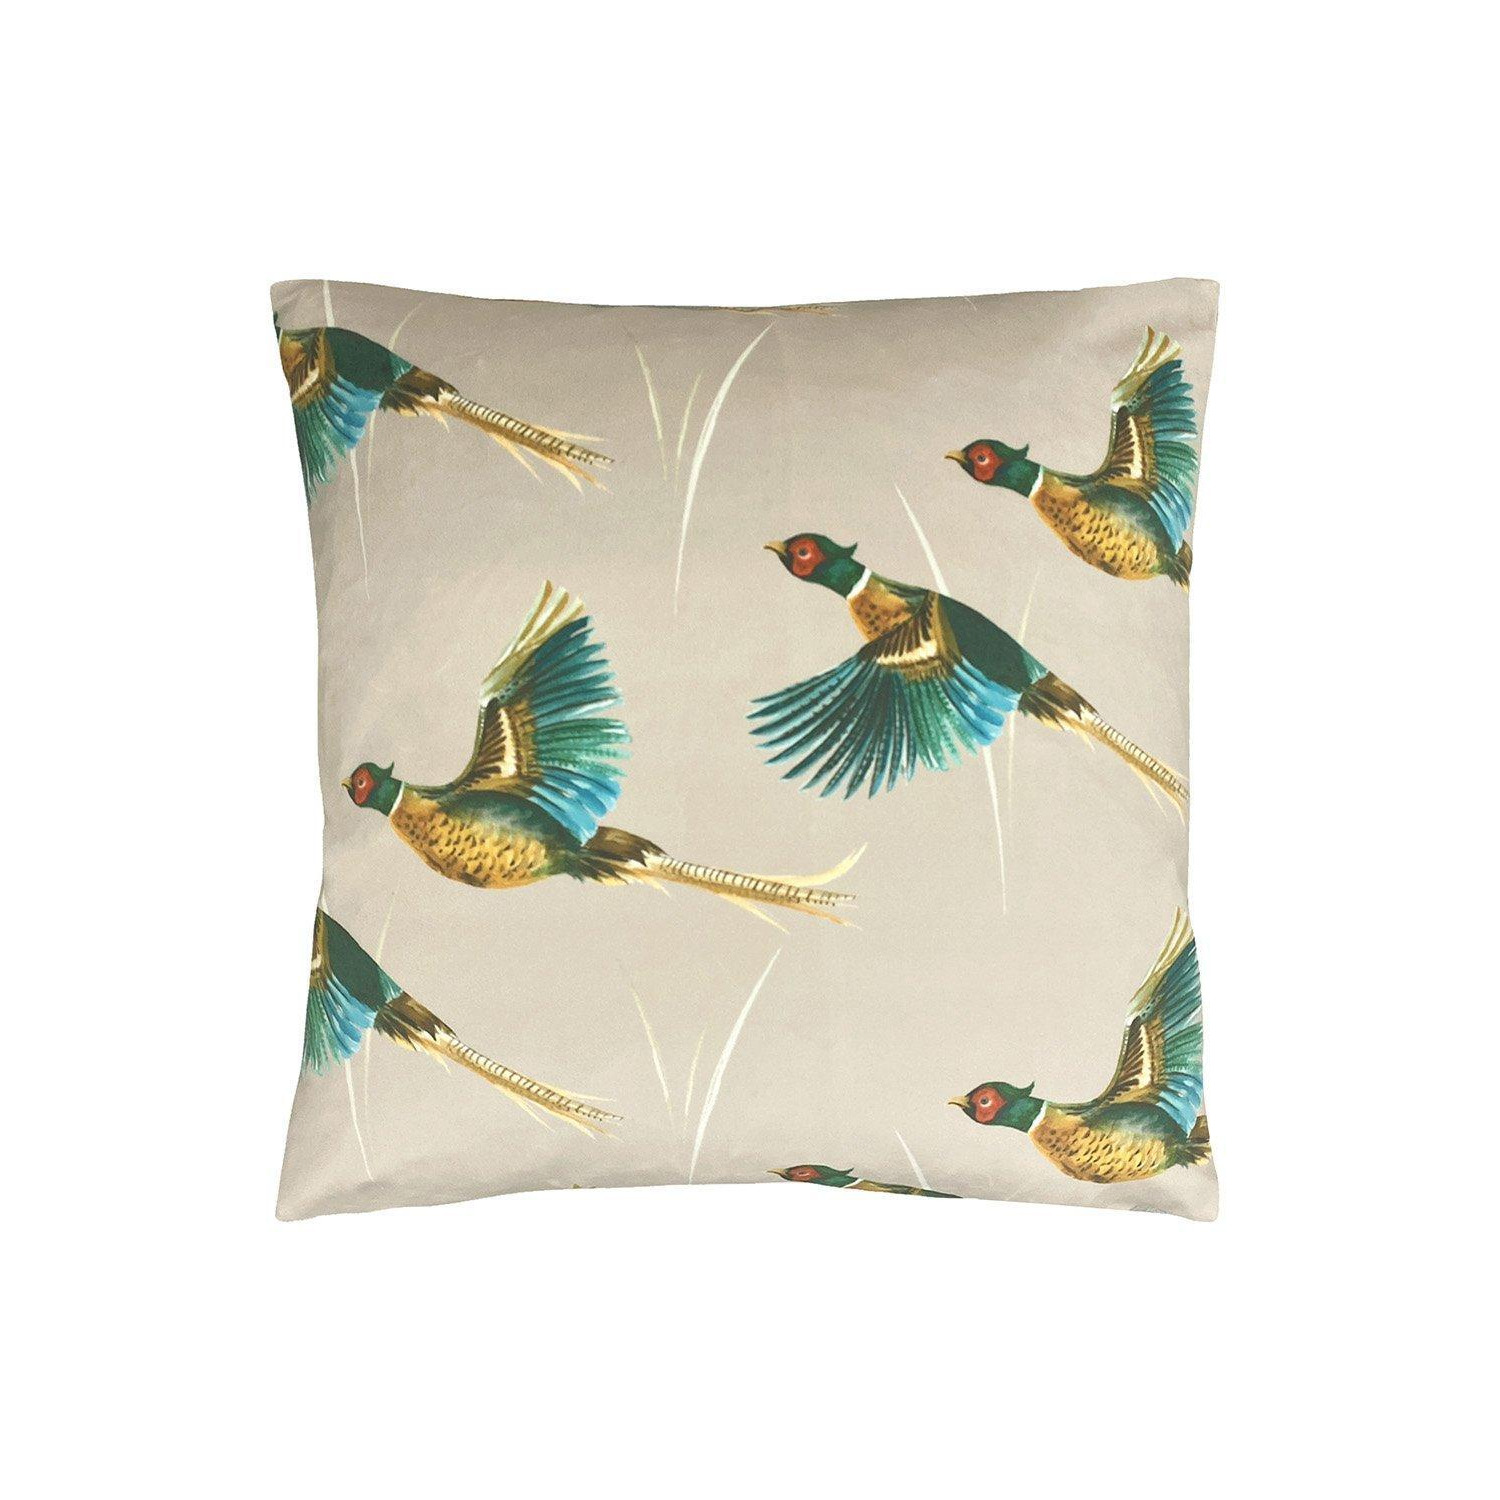 Country Flying Pheasants Hand-Painted Printed Cushion - image 1